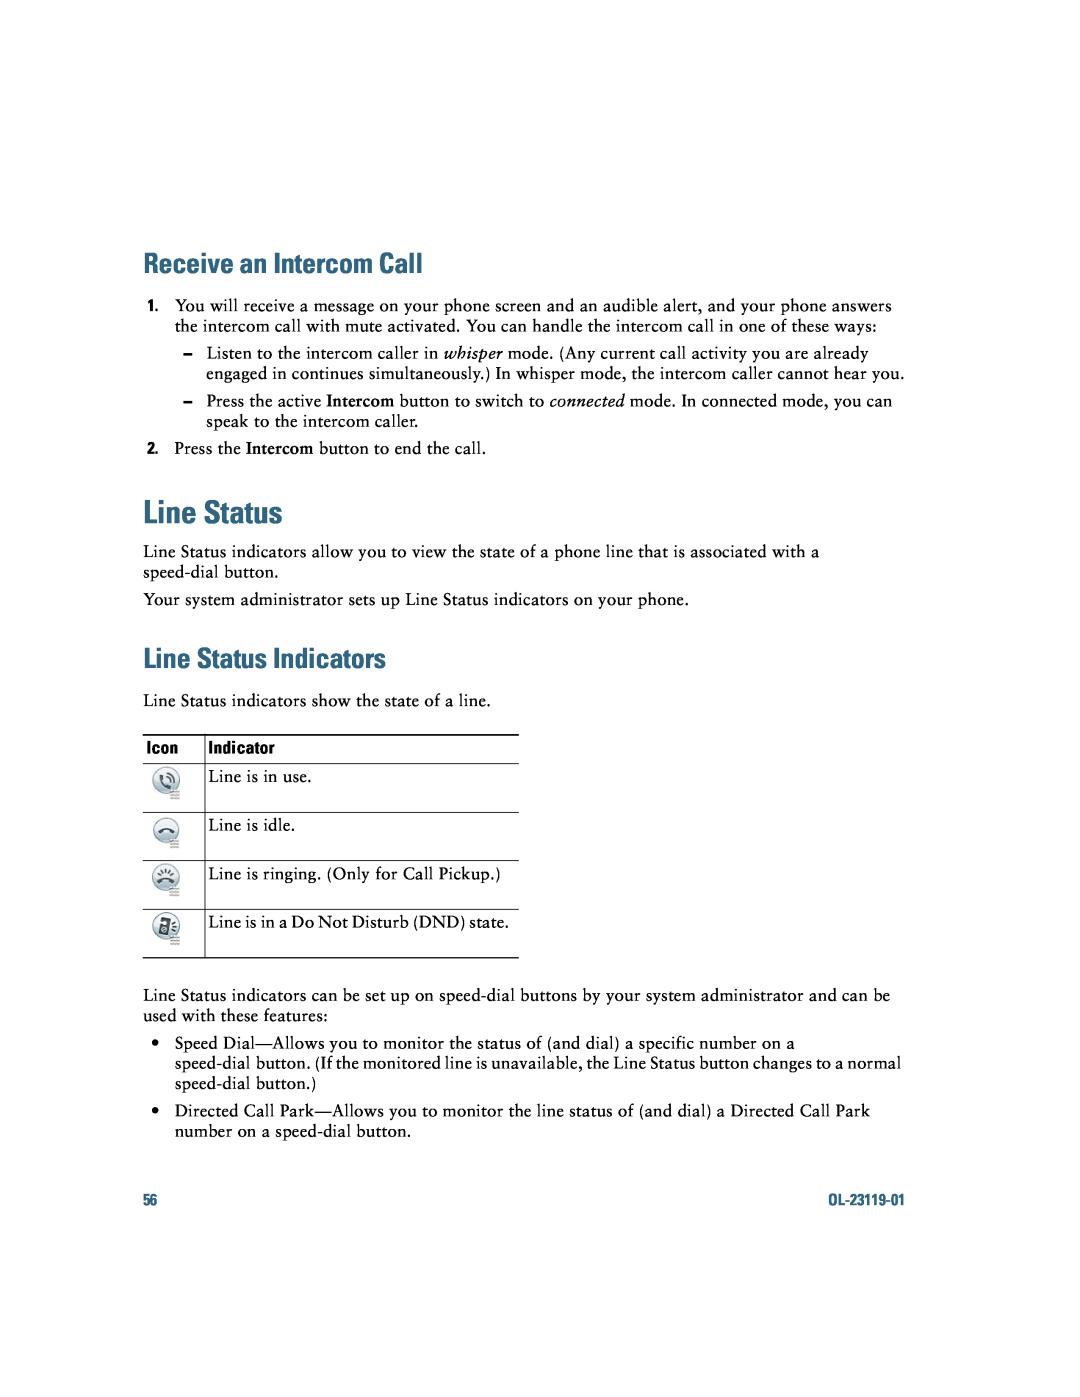 Cisco Systems IP Phone 8941 and 8945 manual Receive an Intercom Call, Line Status Indicators, Icon 